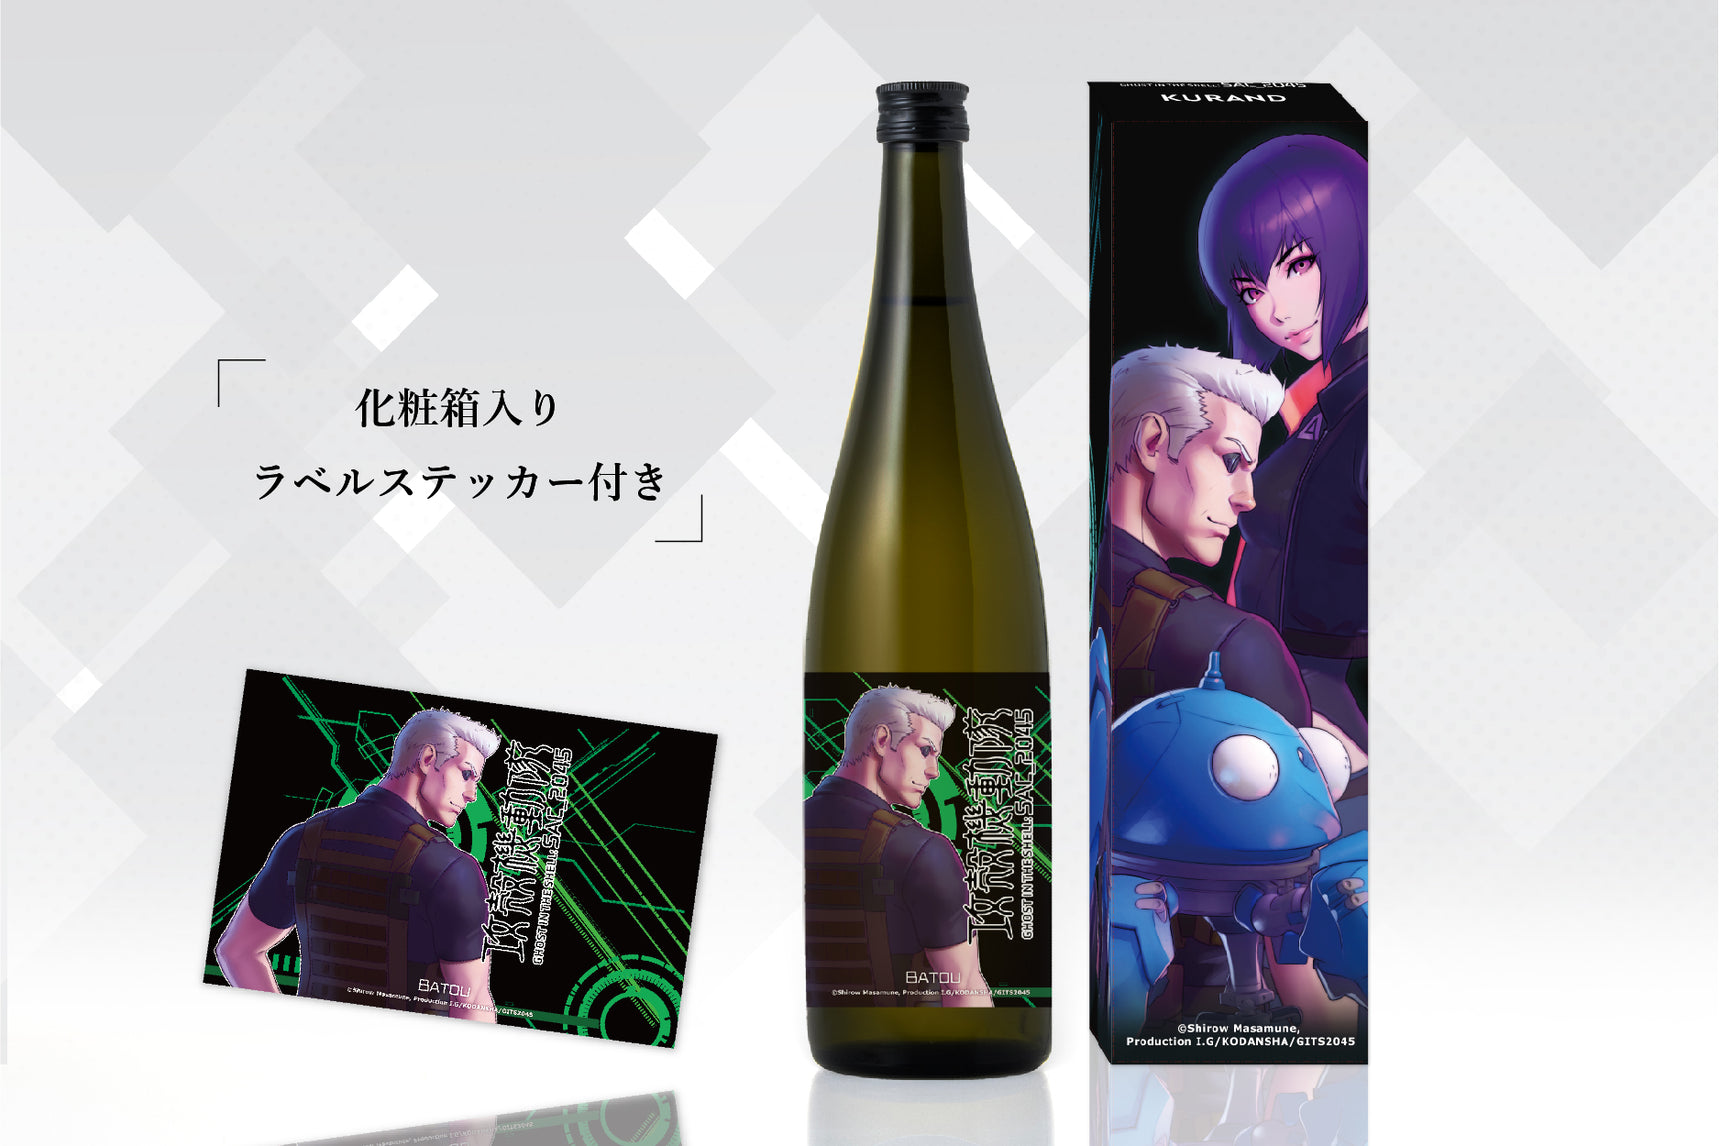 GHOST IN THE SHELL: SAC_2045 - バトーver. -